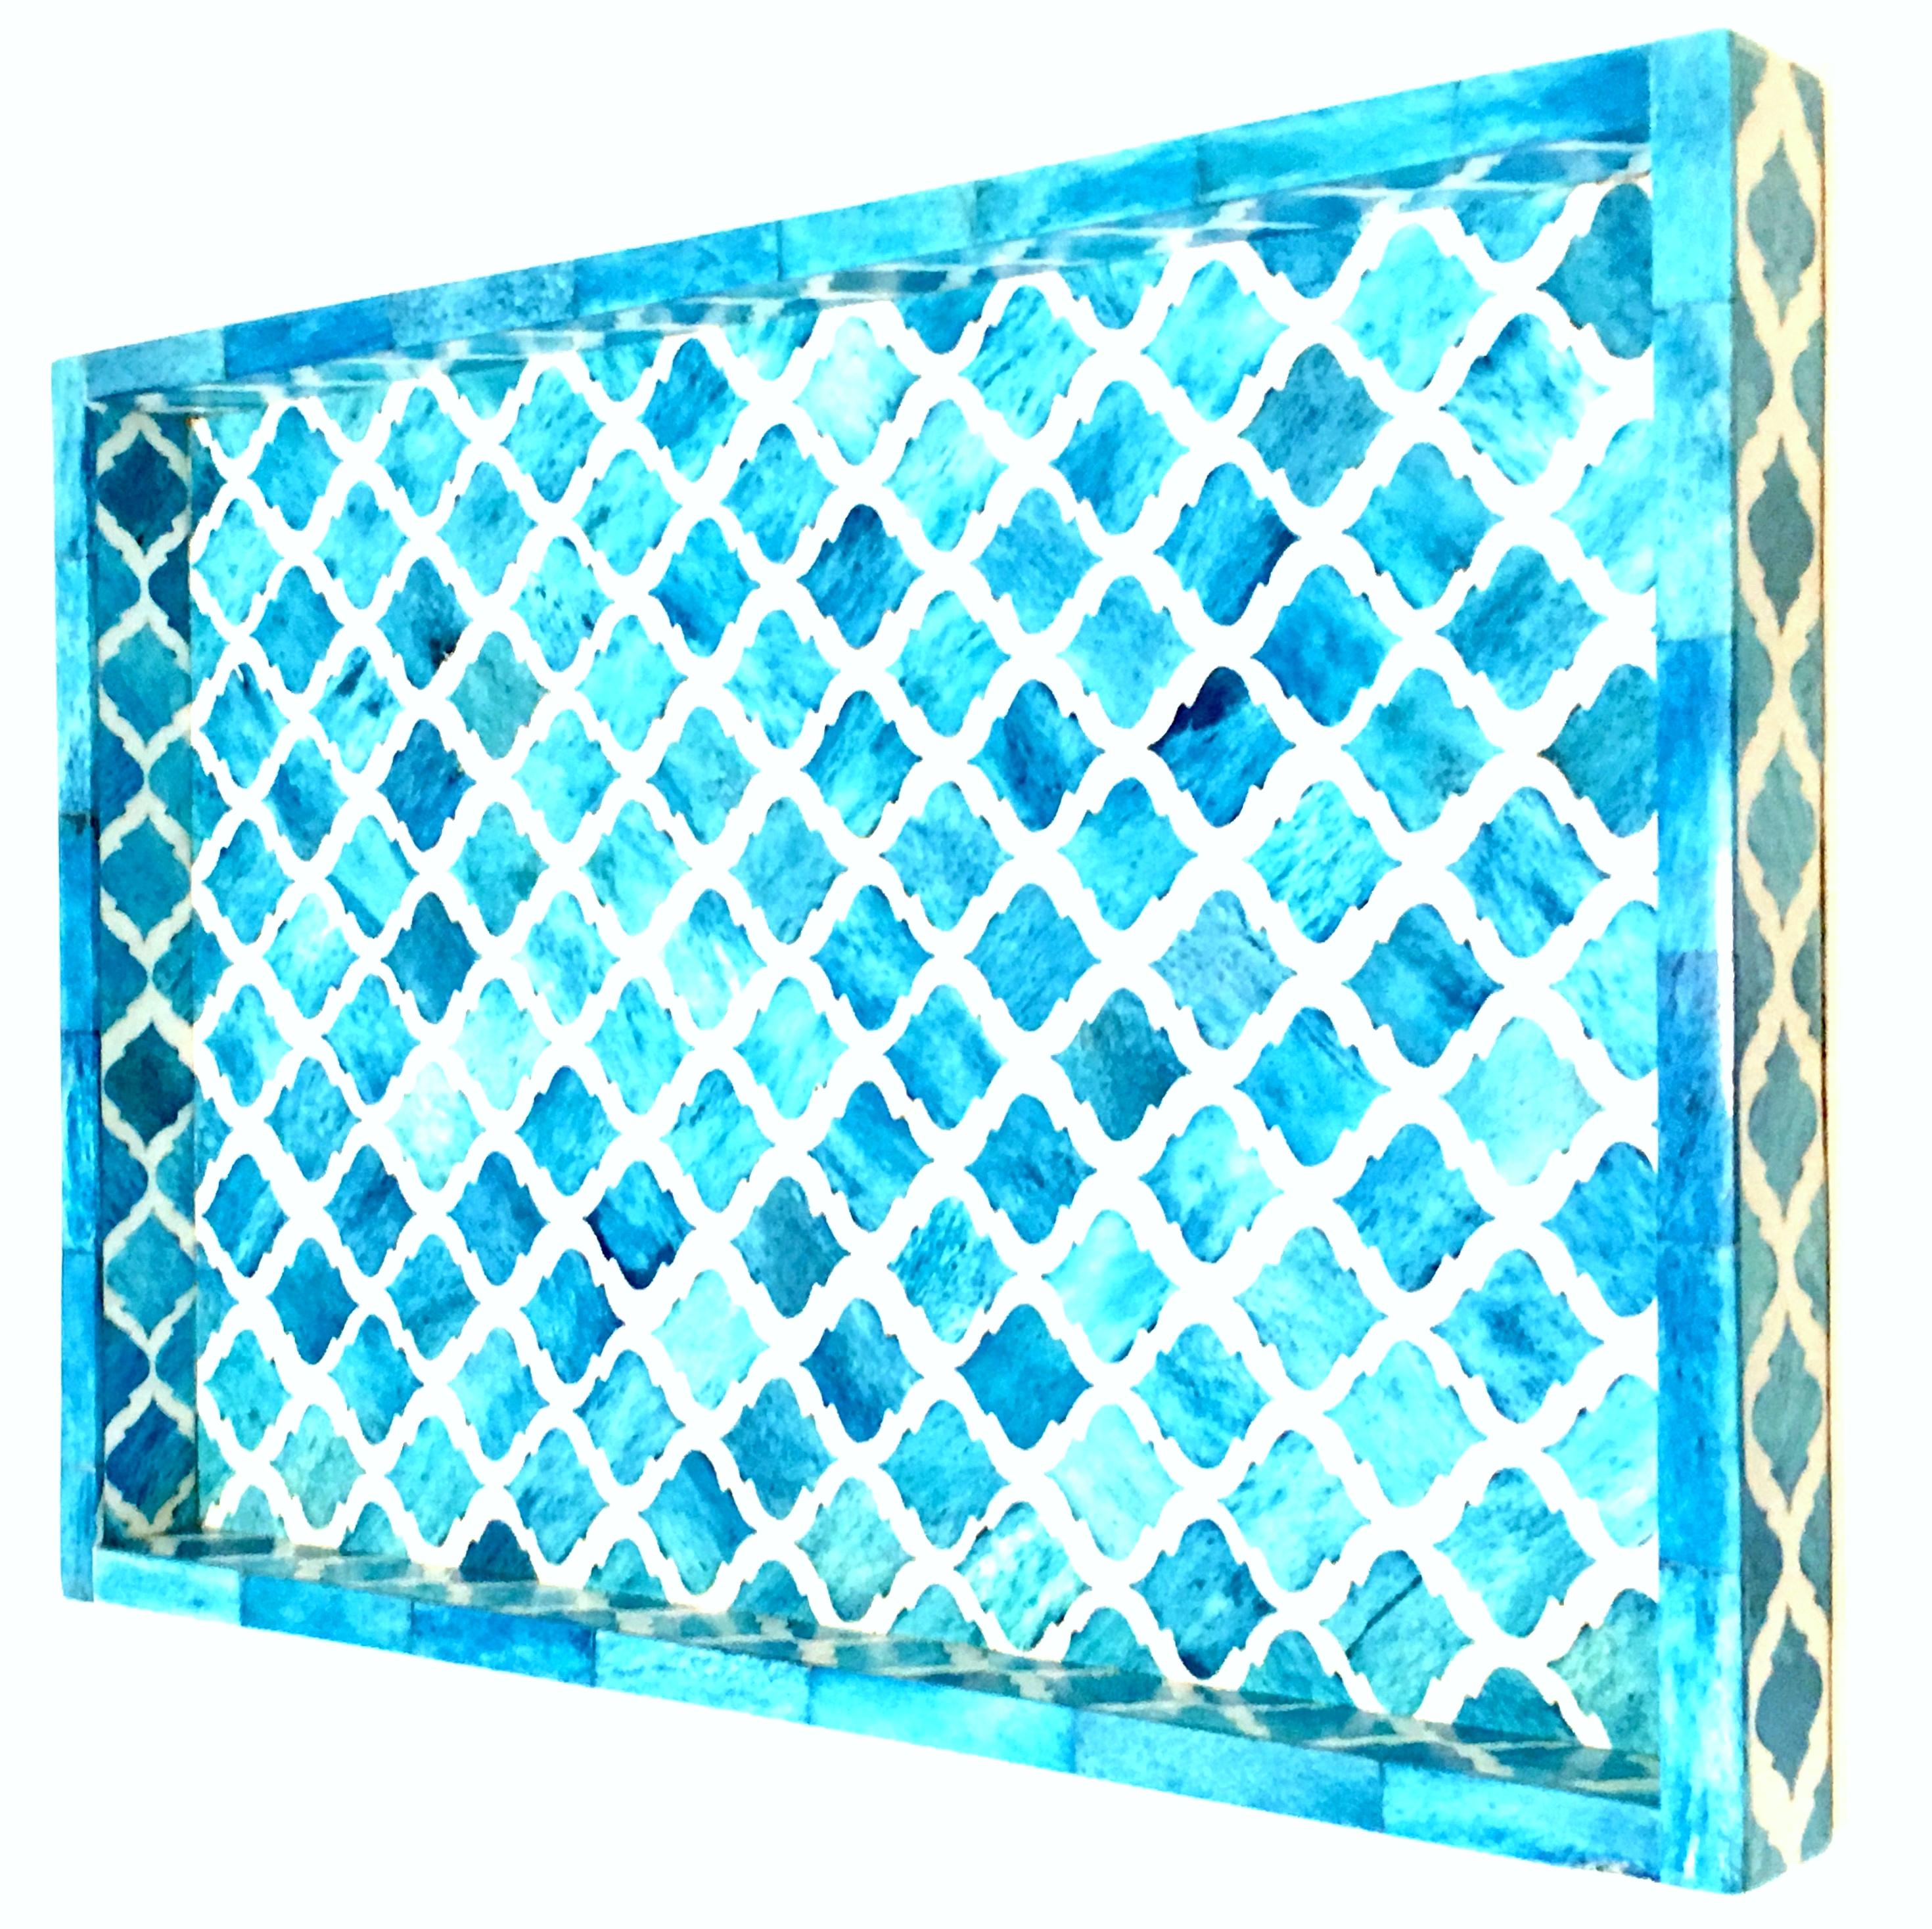 21st Century wood and bone inlay tray and two lidded boxes set of three pieces. Set includes a large rectangular geometric patterned wood and bone inlay tray and two turquoise died dimensional mosaic lidded wood boxes. Made In